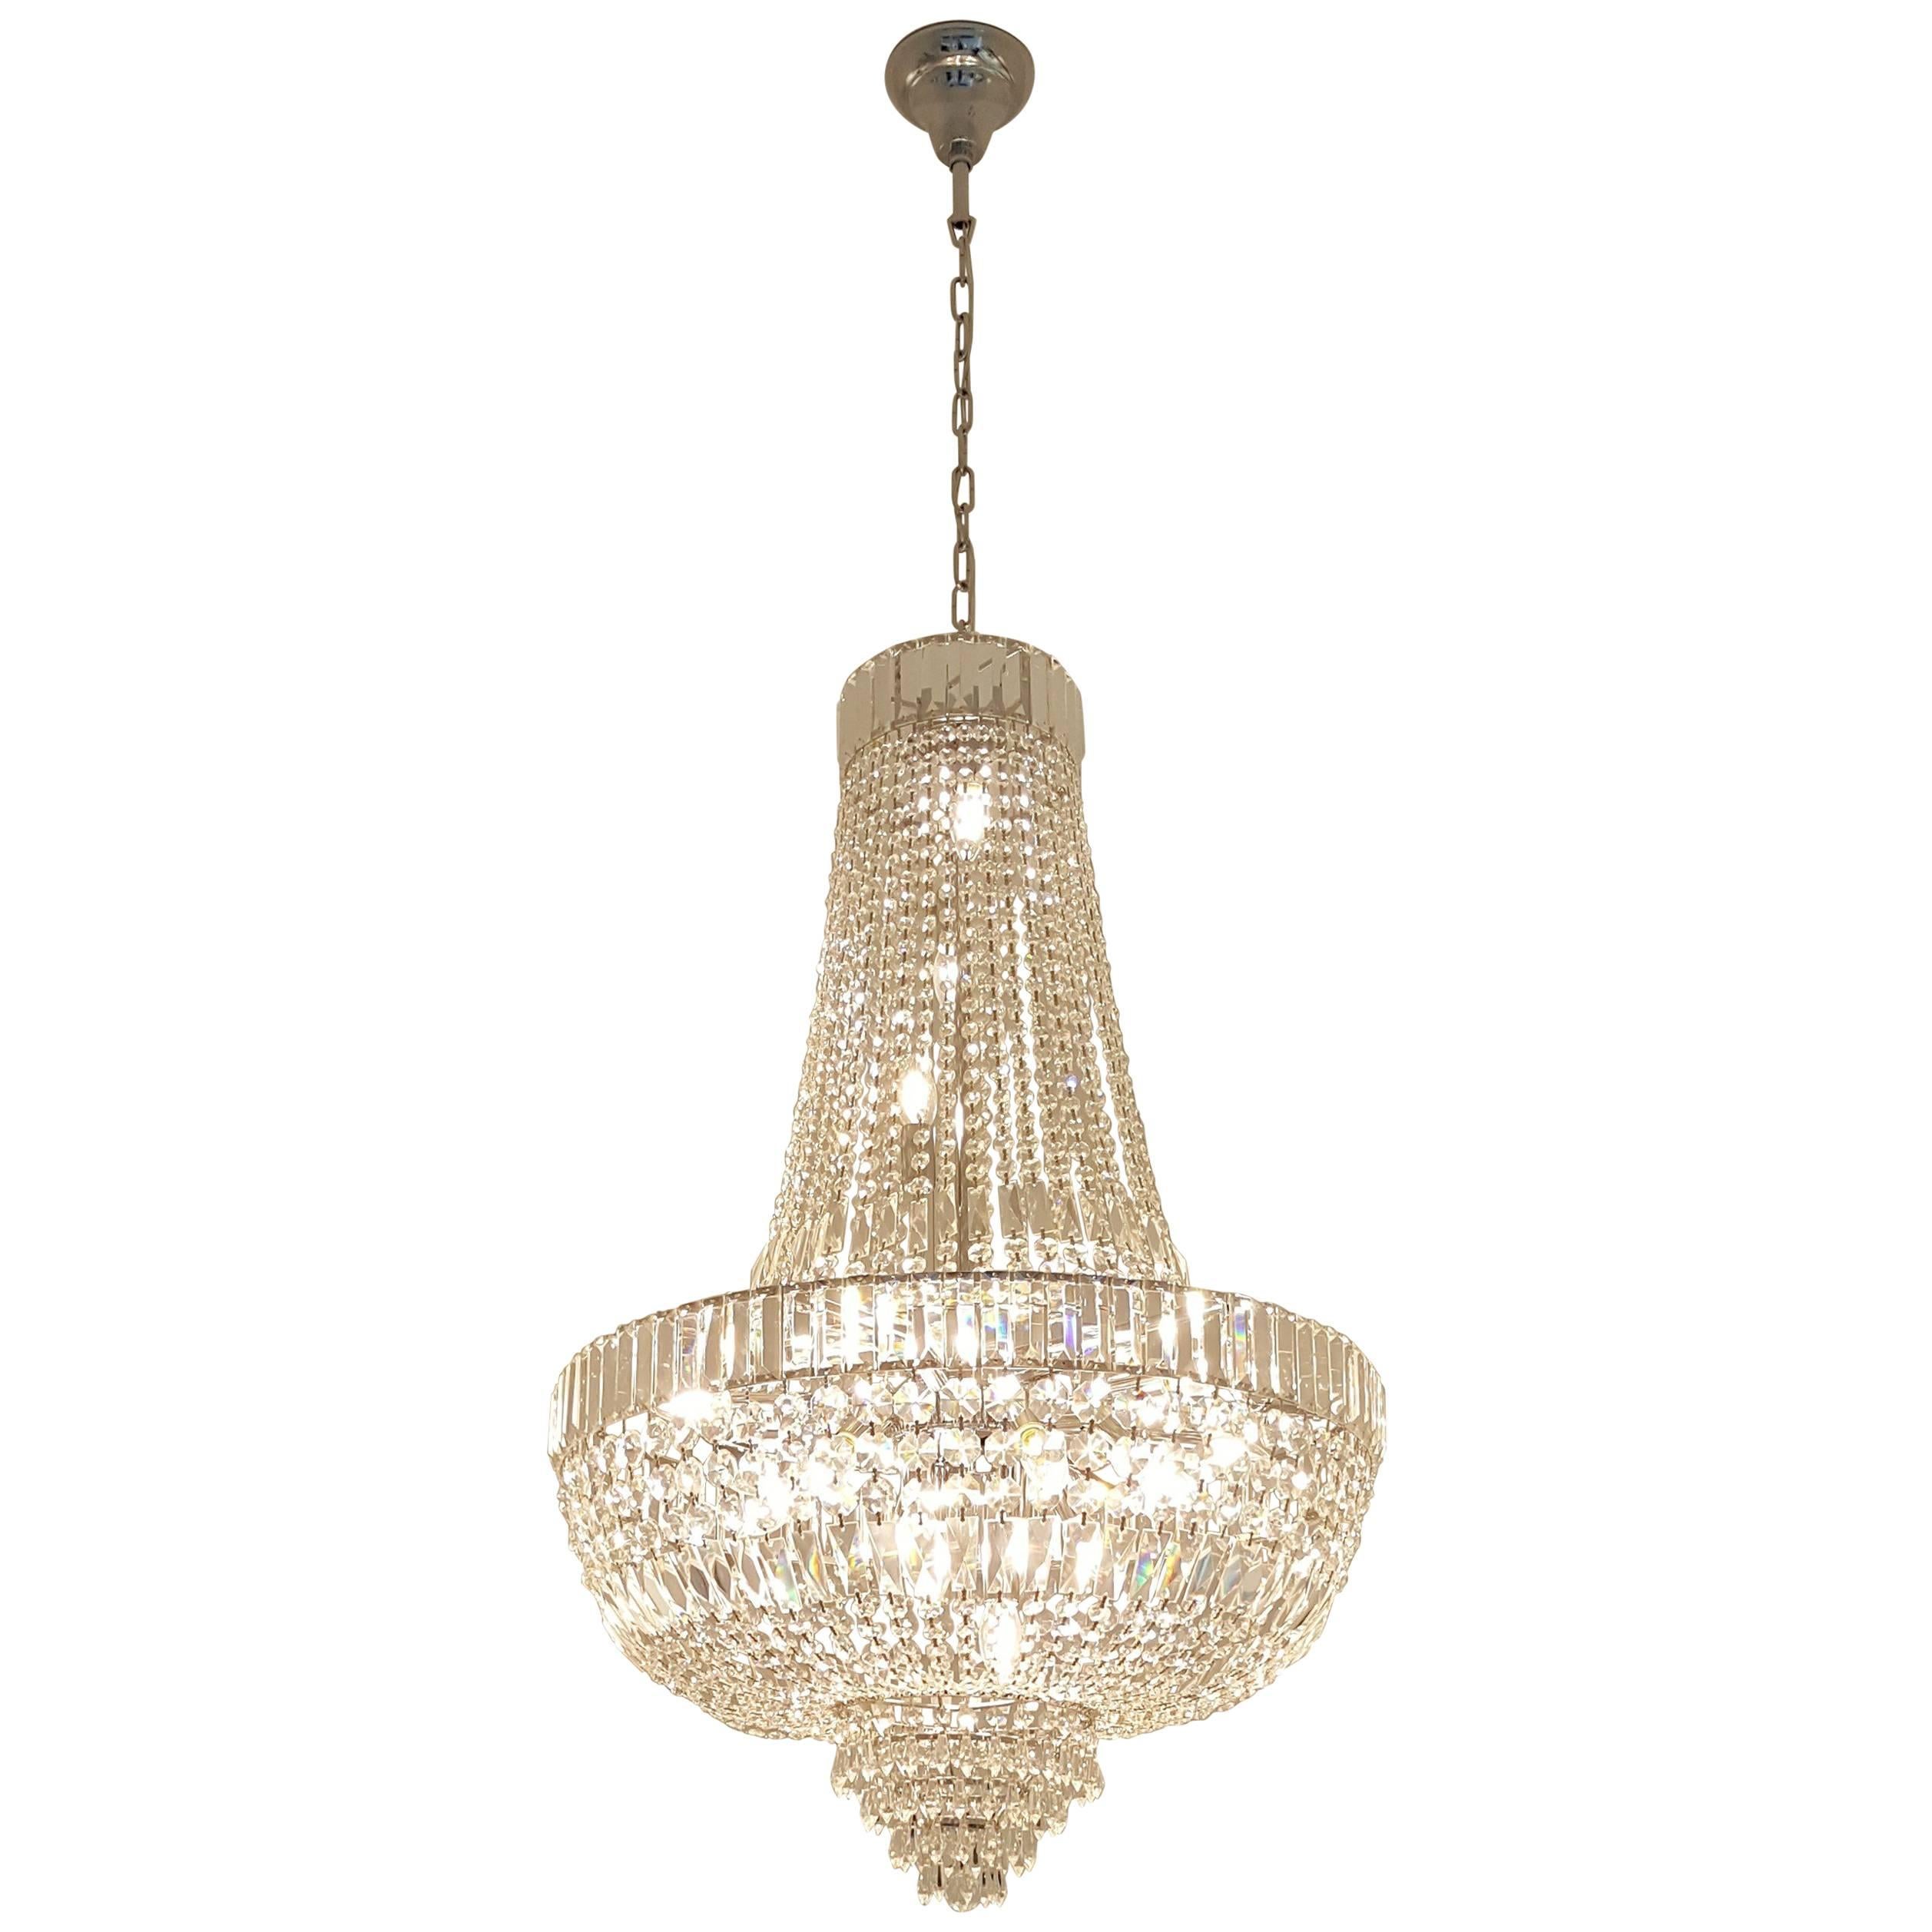 Art Deco Style Crystal Chandelier Empire Sac a Pearl Palace Lamp Chateau Lustre